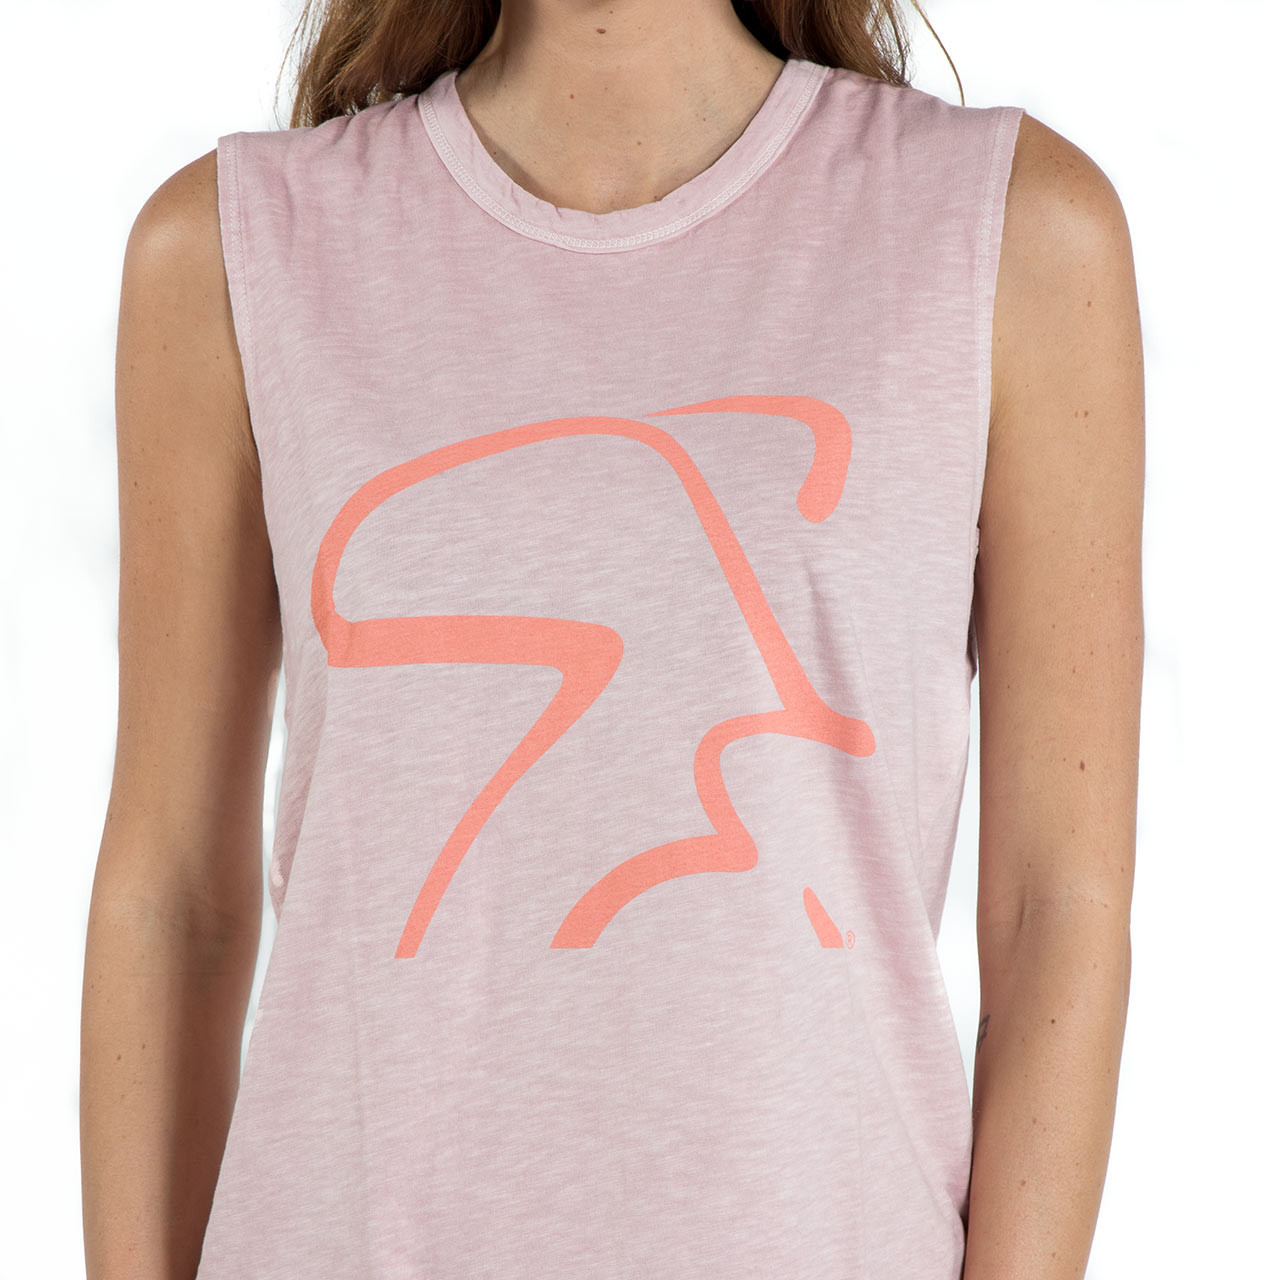 Spinning Inside Out Garment Dyed Slub Sleevless T-Shirt - Rose Quartz Pigment by Spinning